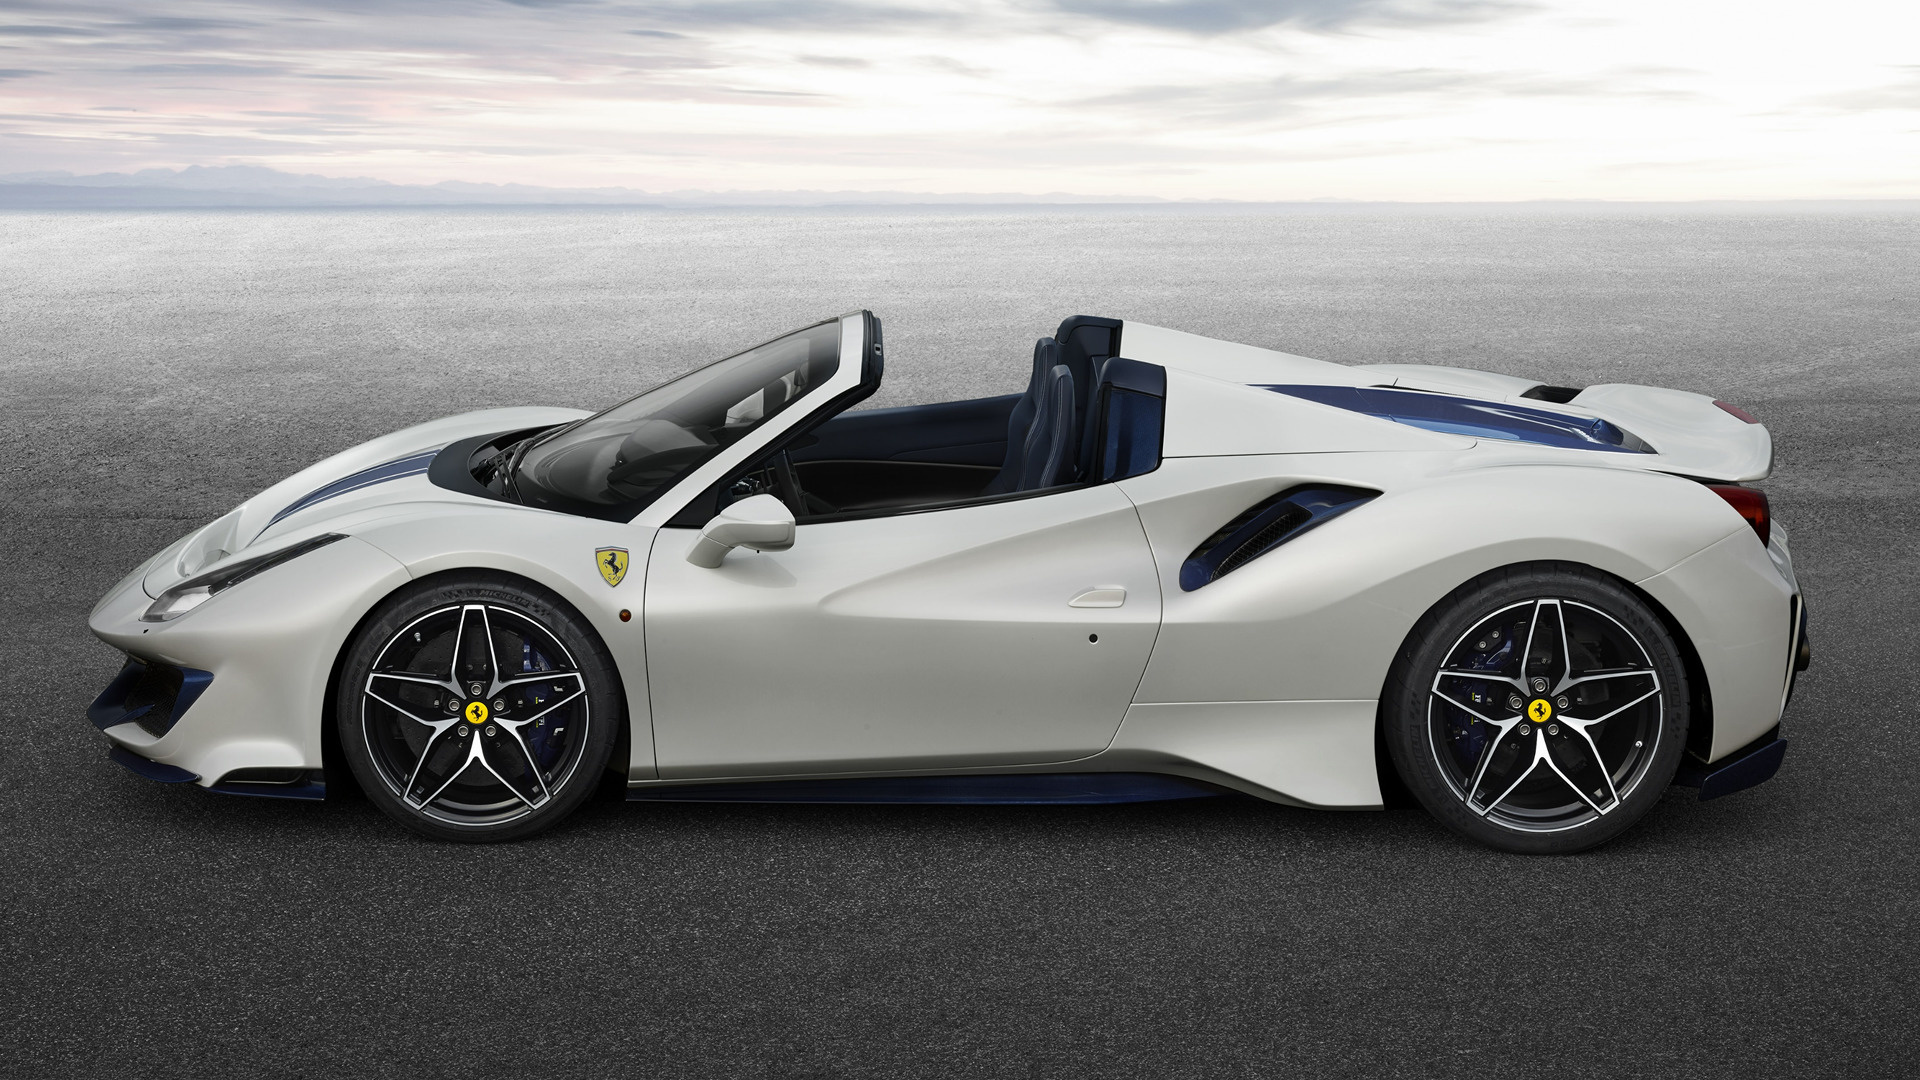 2018 Ferrari 488 Pista Spider Wallpapers And Hd Images